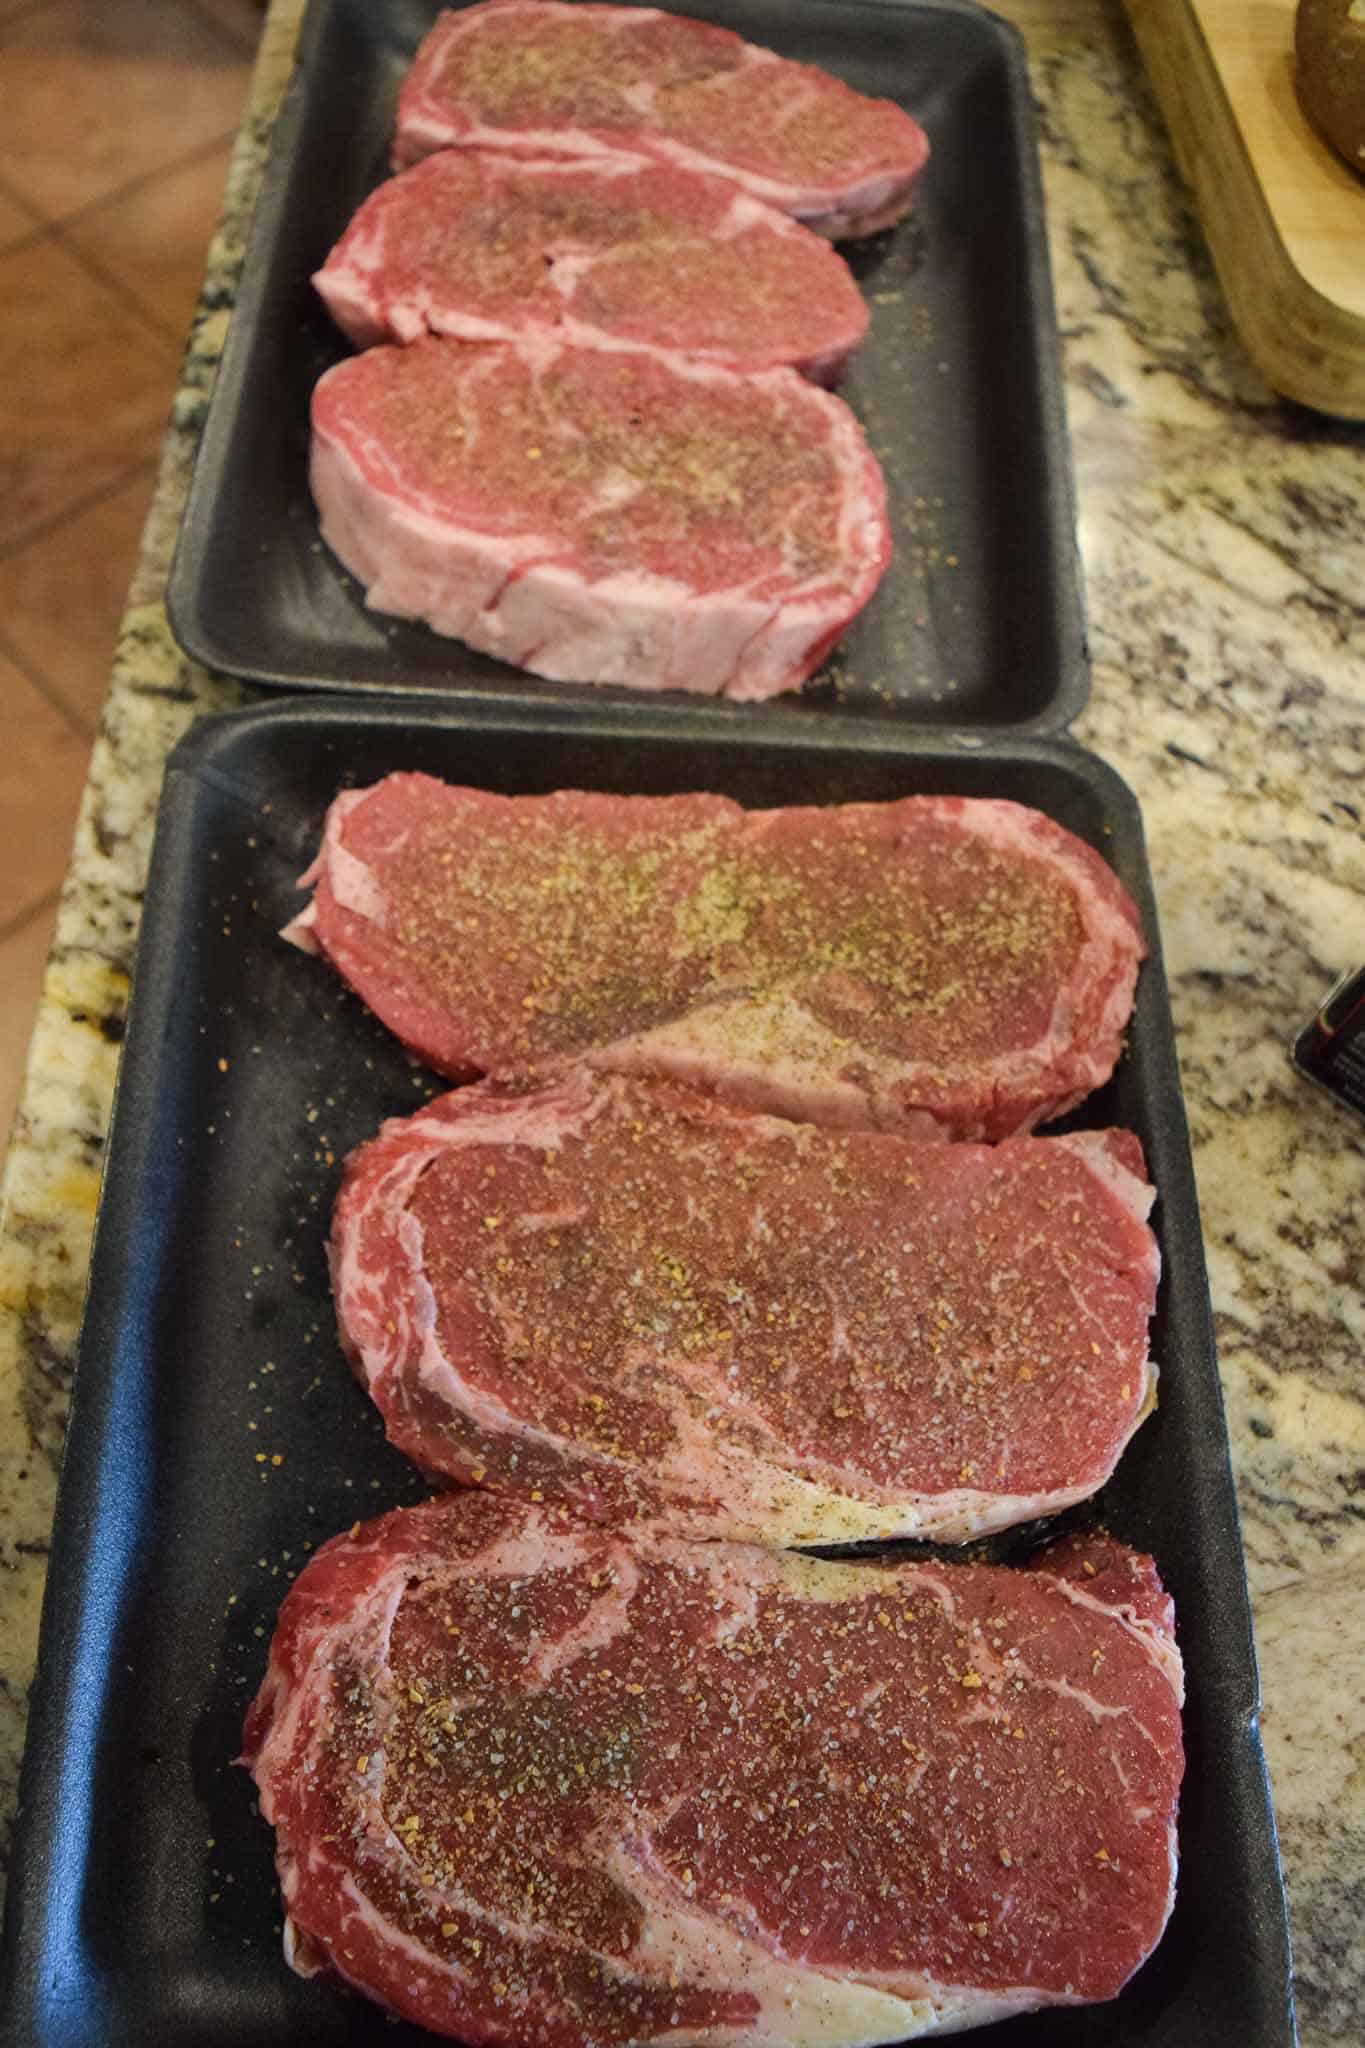 6 steaks covered in seasonings ready to be grilled 